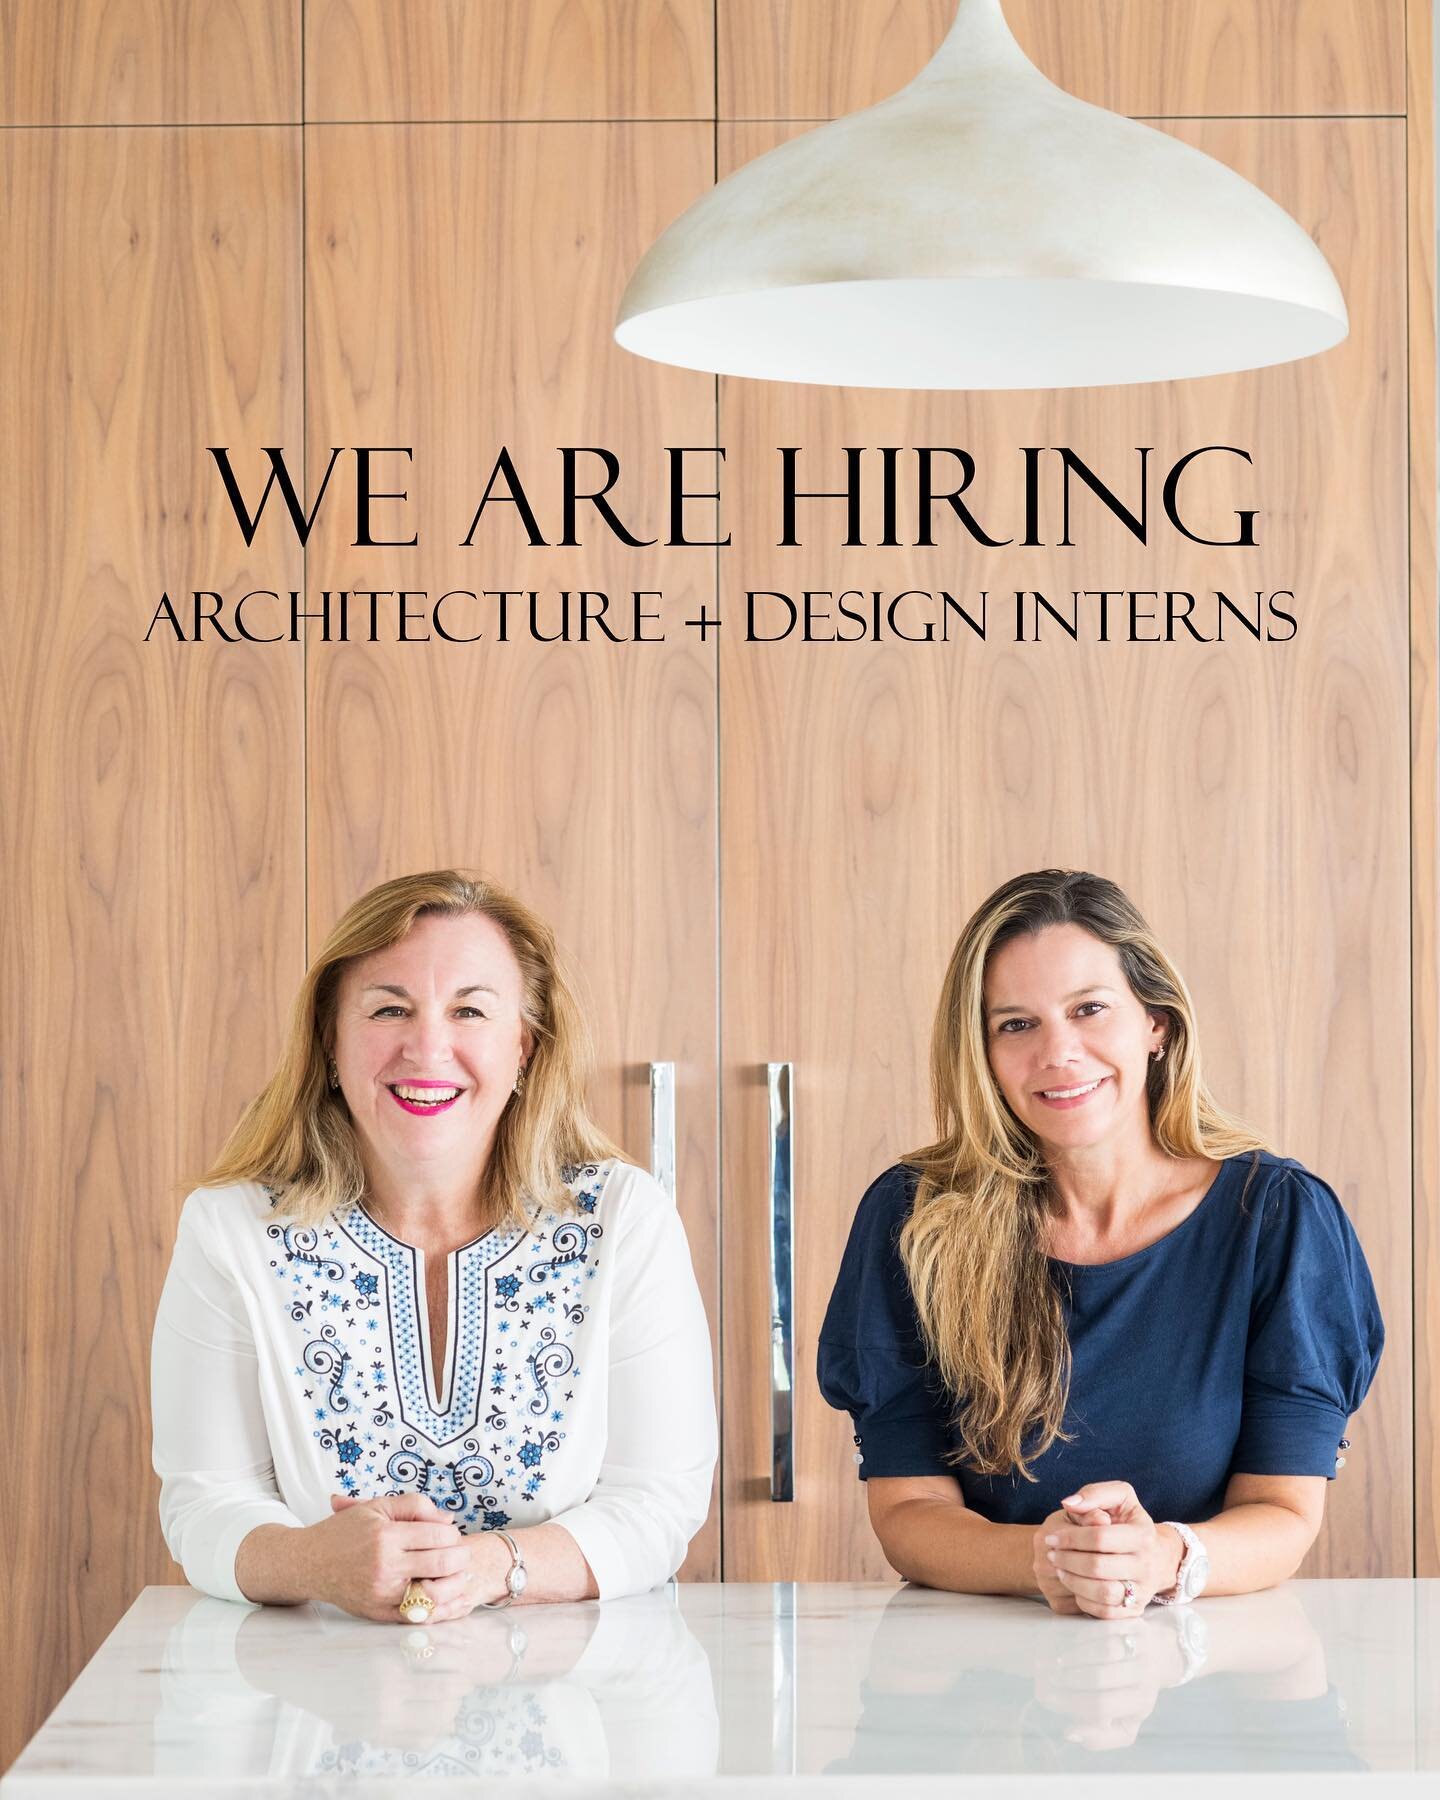 Must be 
&bull; passionate about design;
&bull; a problem solver; 
&bull;a good time;
DM @lauracasalearchitect for details! We use AutoCad, pshop and Rhino a plus! 📸 @macchiaphoto #architorture #werk #wahwahwah